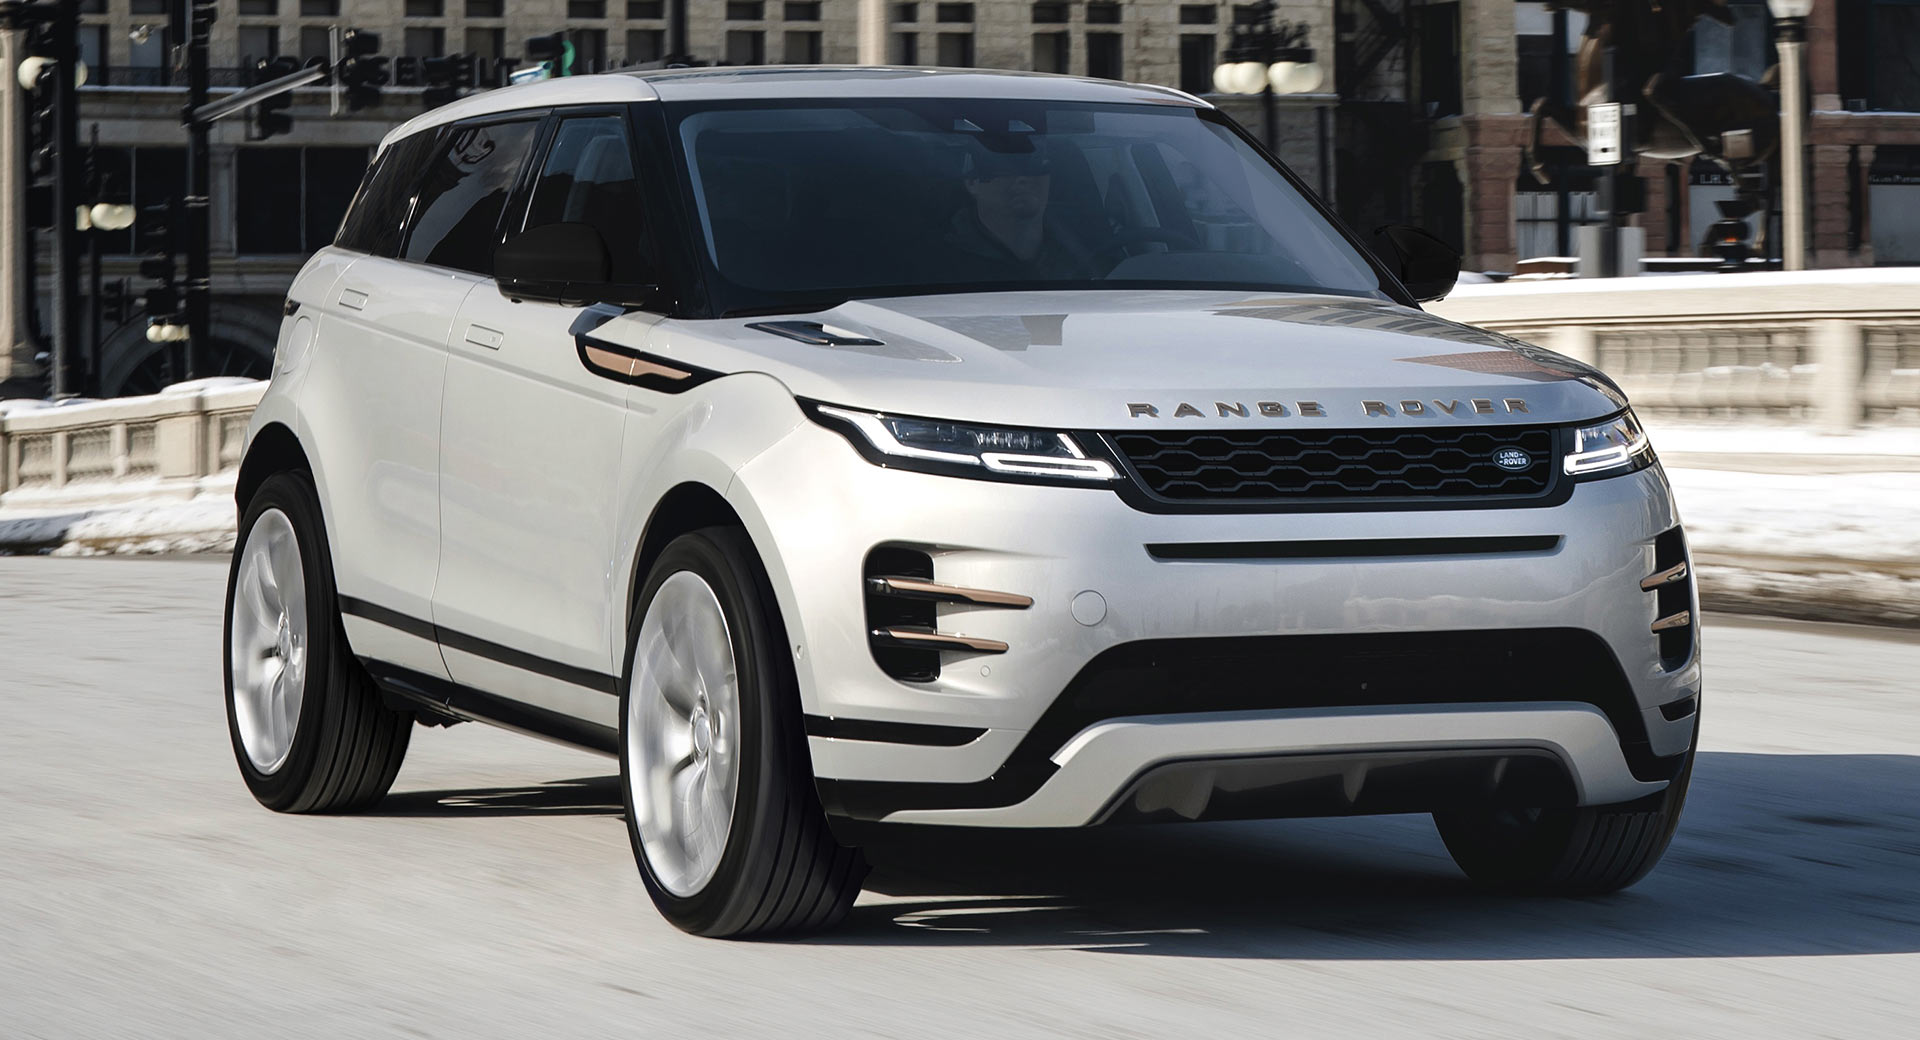 AllNew 2021 Range Rover Evoque from £32,100 in The UK